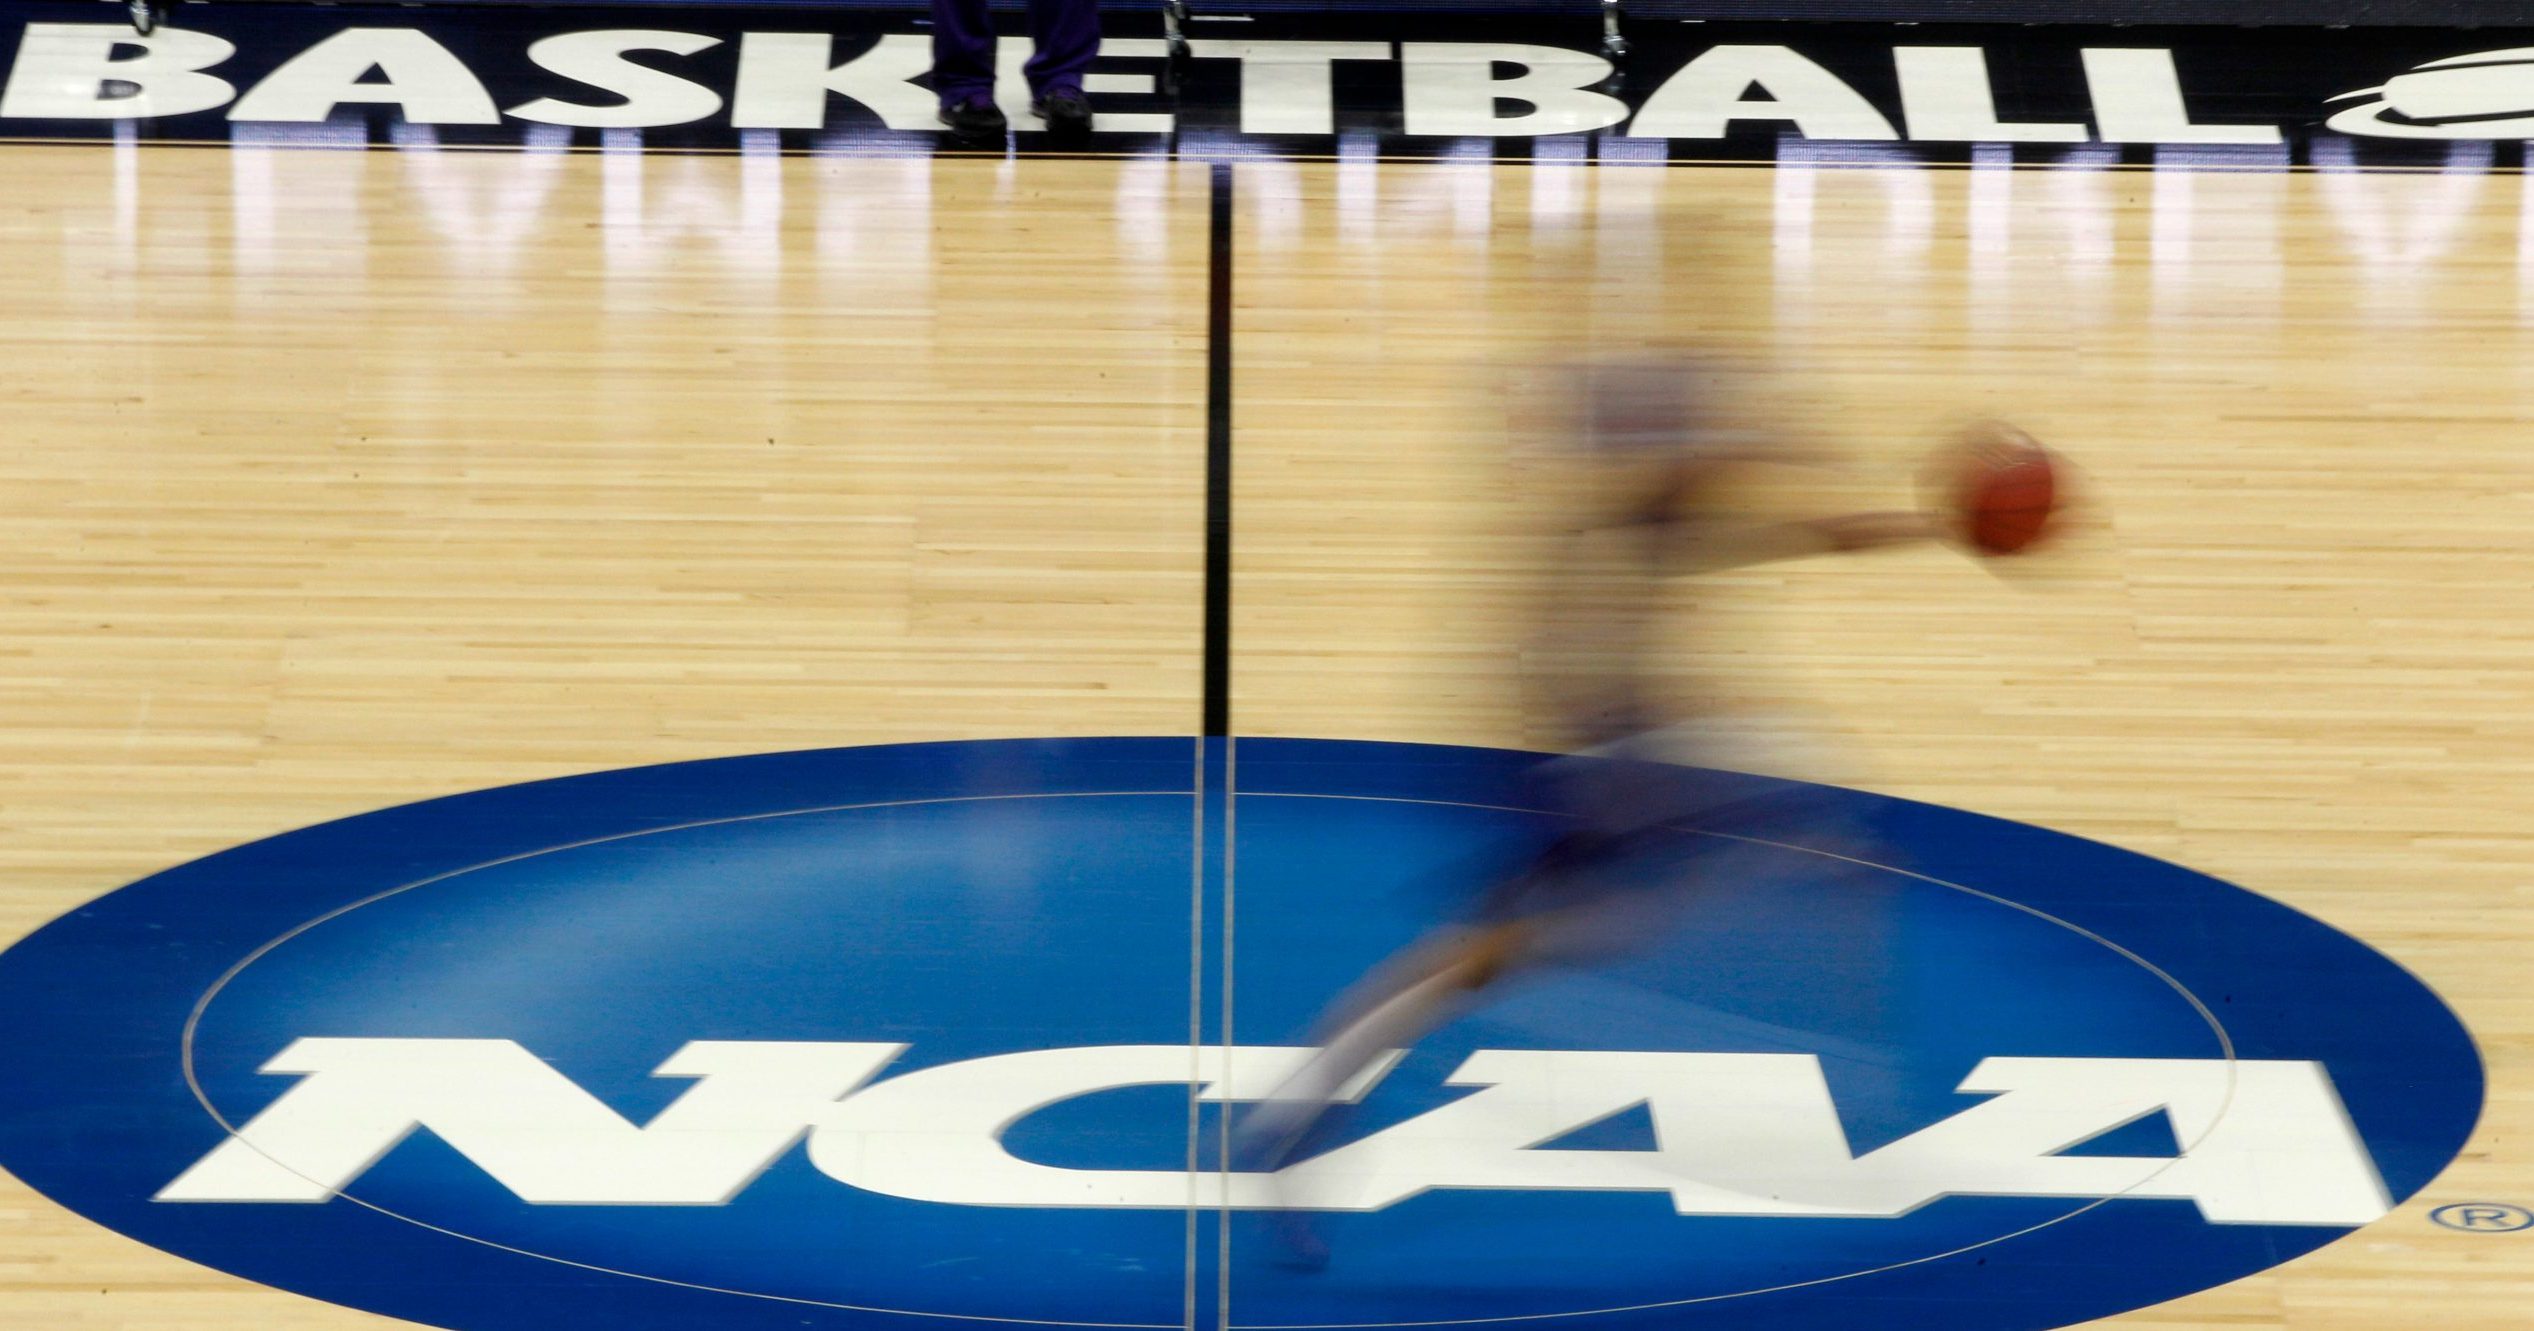 A player runs across the NCAA logo during practice in Pittsburgh before an NCAA tournament college basketball game.